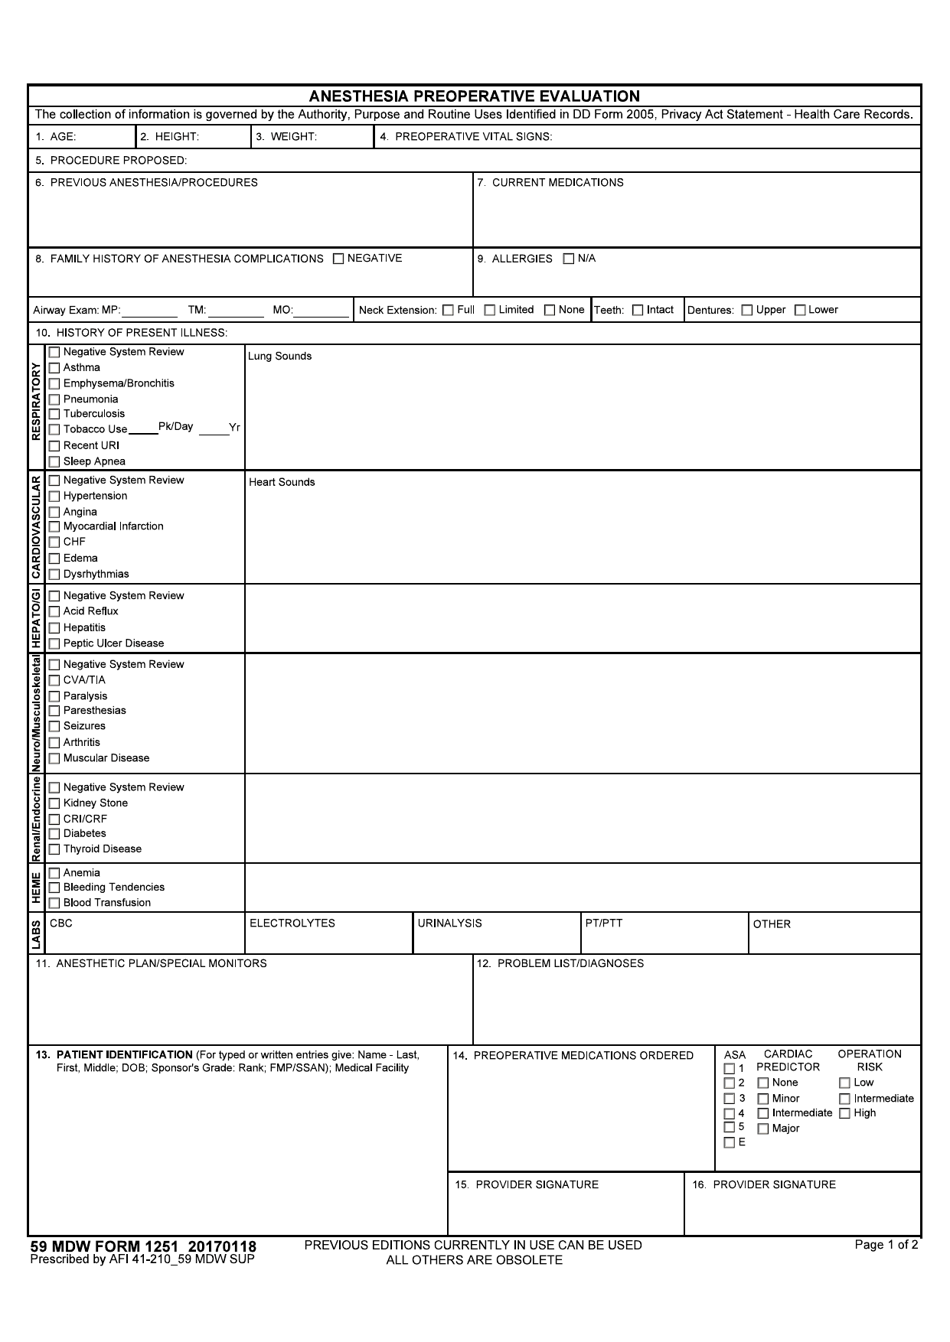 59 MDW Form 1251 Anesthesia Preoperative Evaluation, Page 1